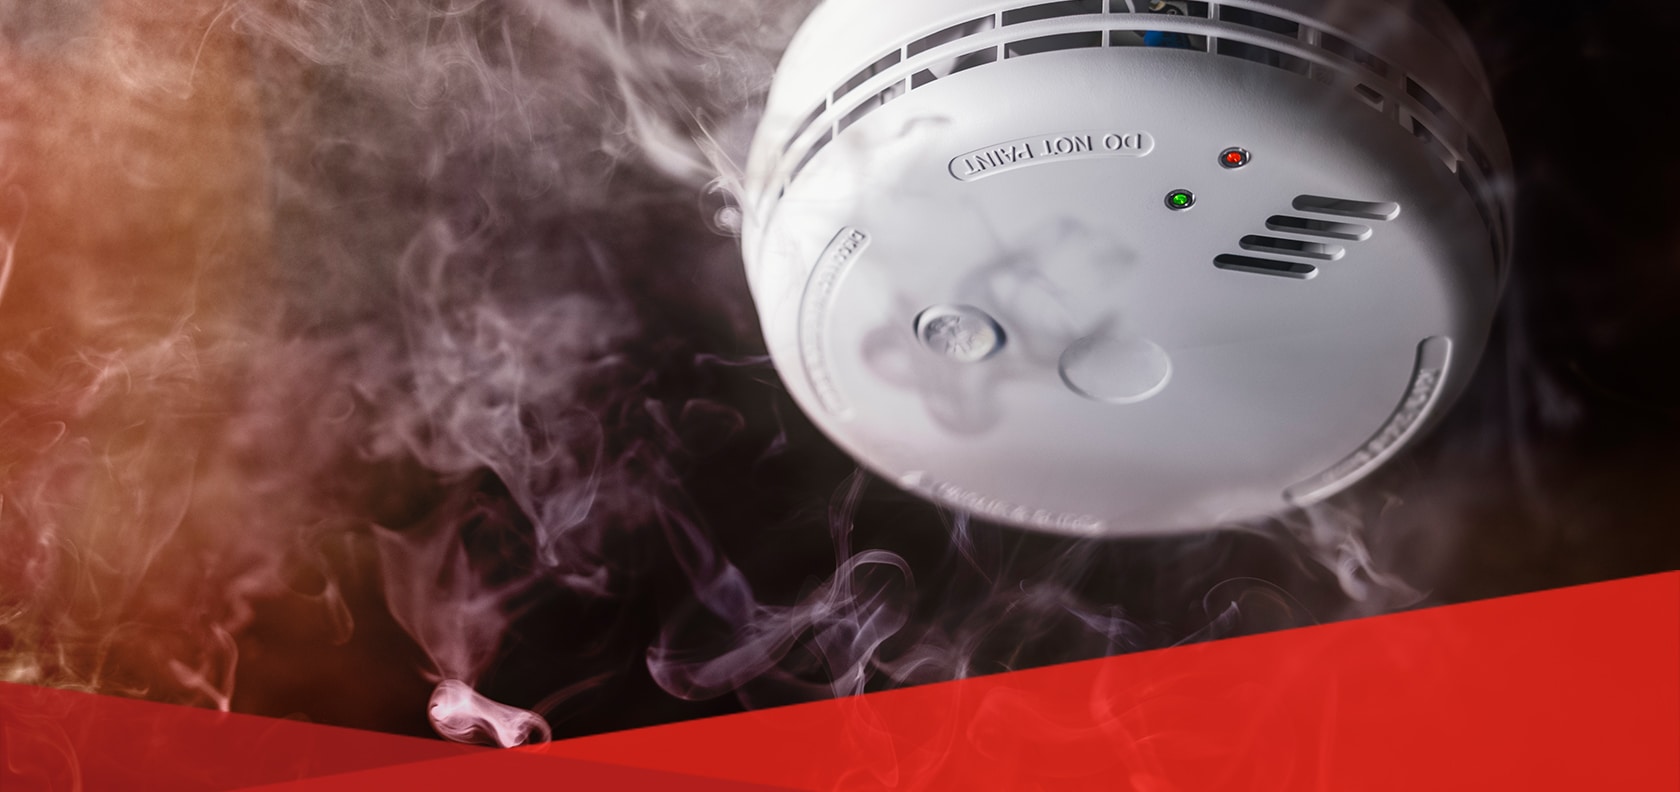 A summary of changes to smoke and carbon monoxide regulations